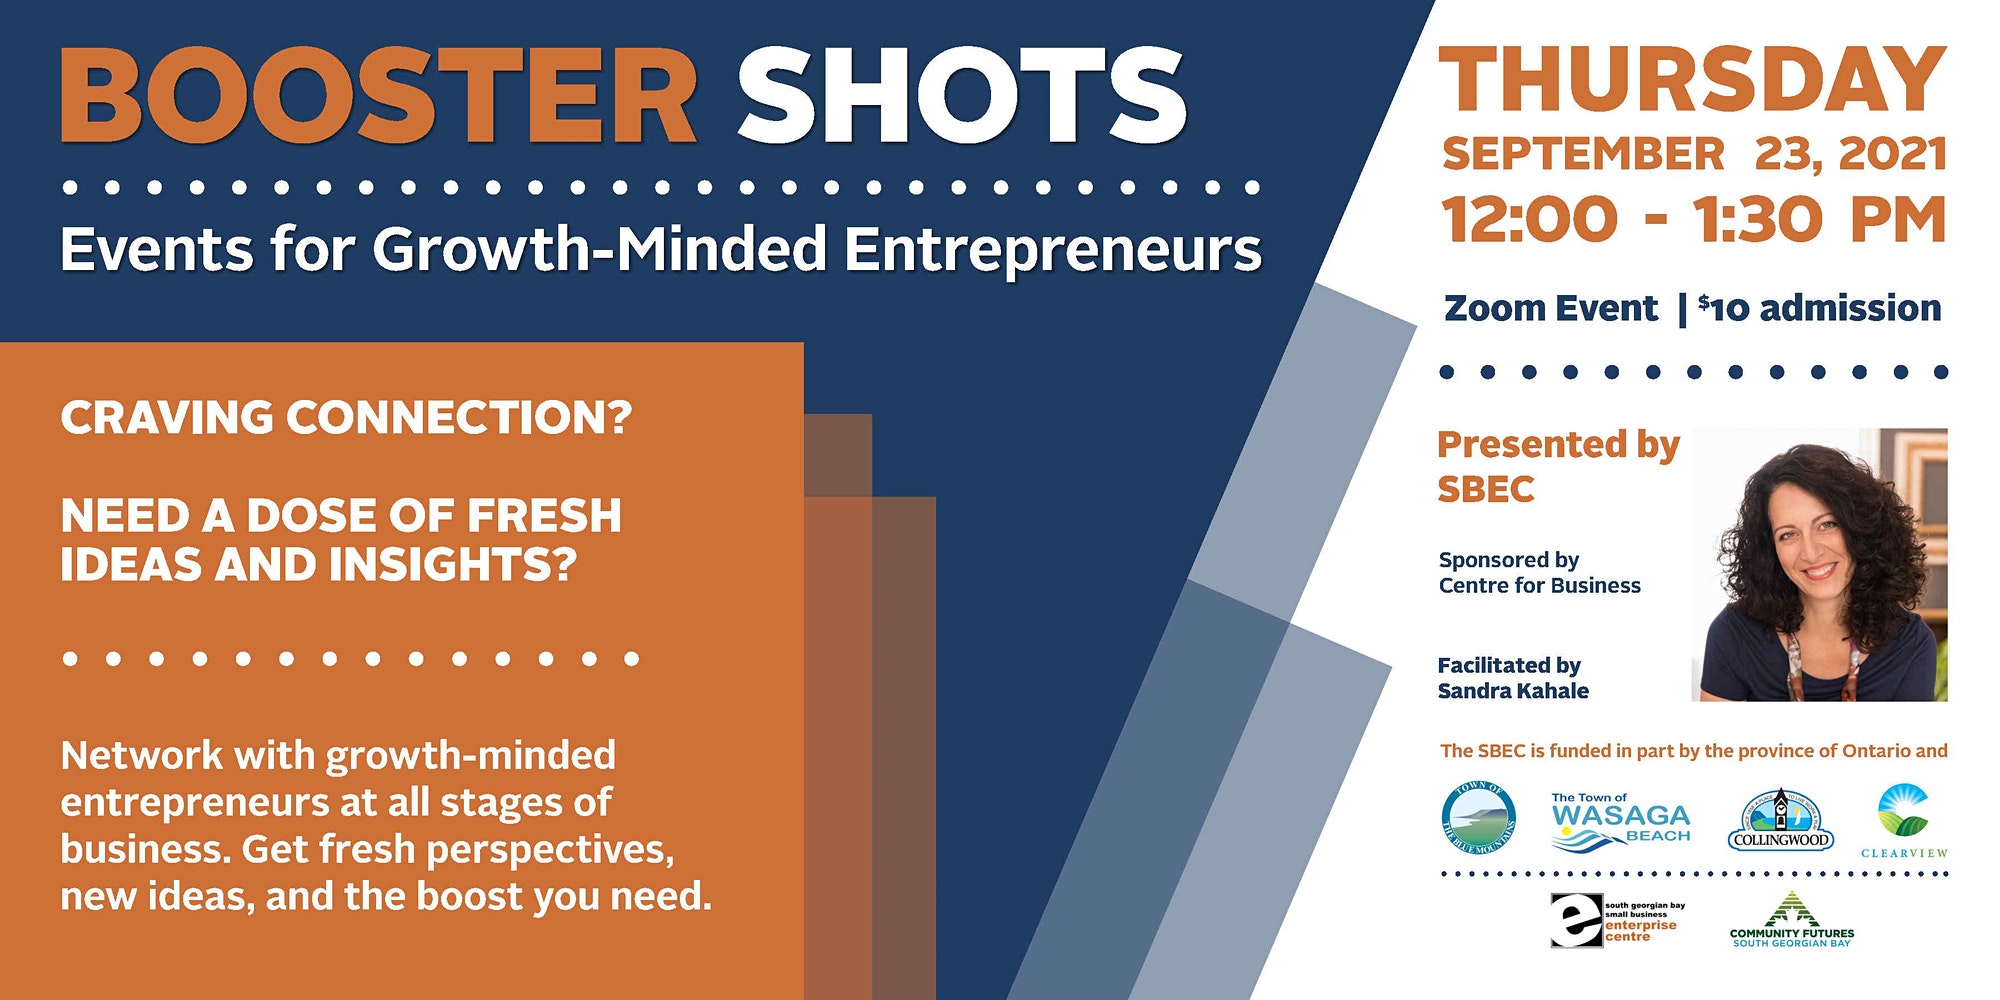 Booster Shots: Events for growth minded entrepreneurs- Zoom event presented by SBEC @ Sept. 23rd, 2021 12-1:30pm